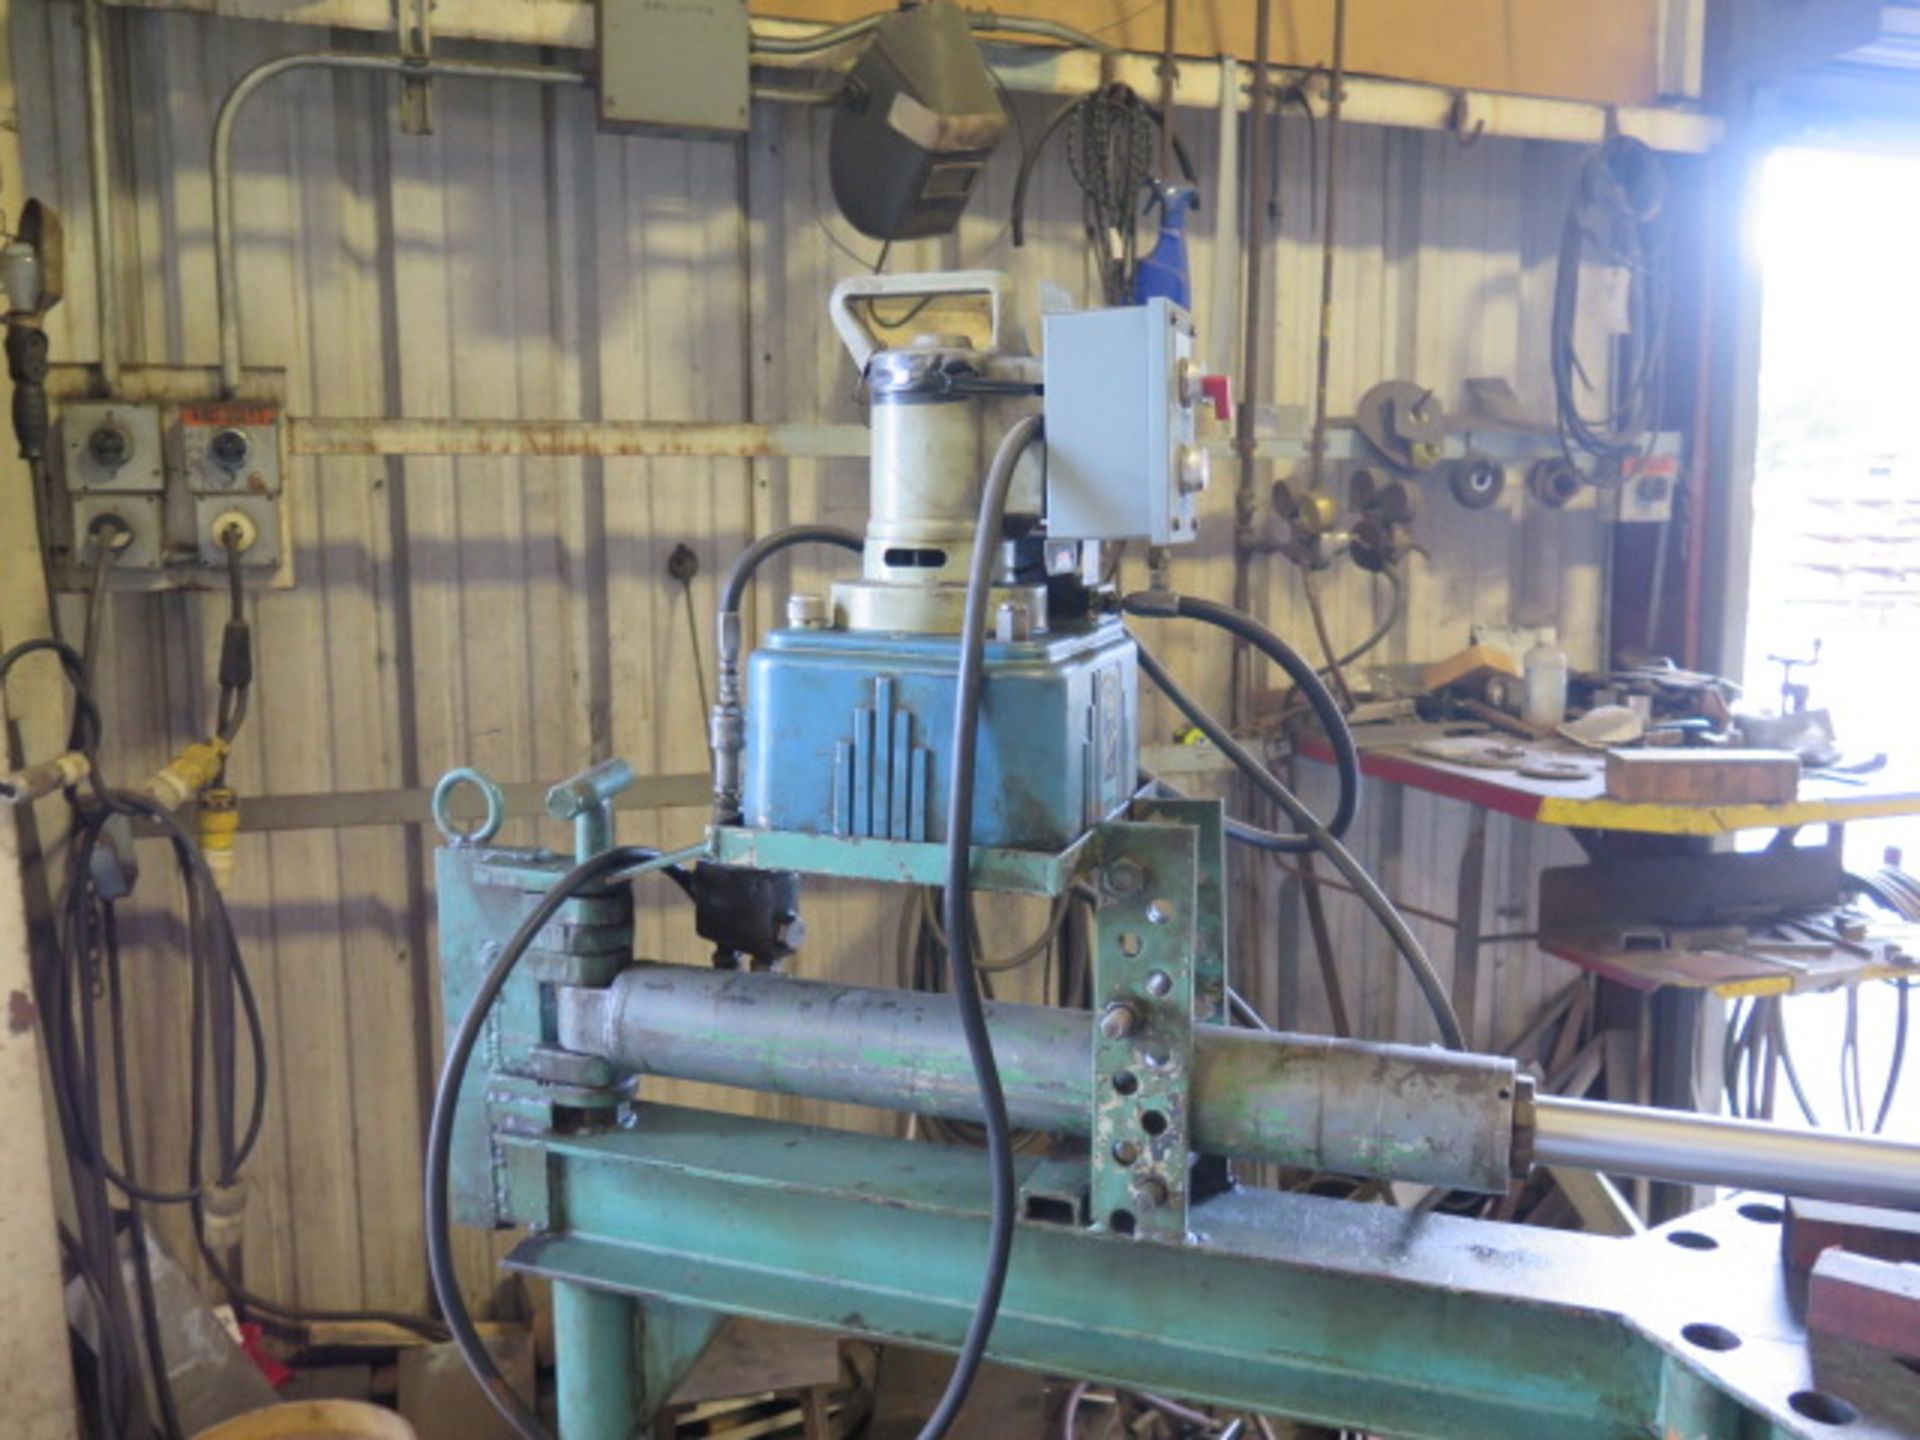 Custom Hydraulic Bending Press / Hydraulic H-Frame Press Combo, SOLD AS IS - Image 5 of 12